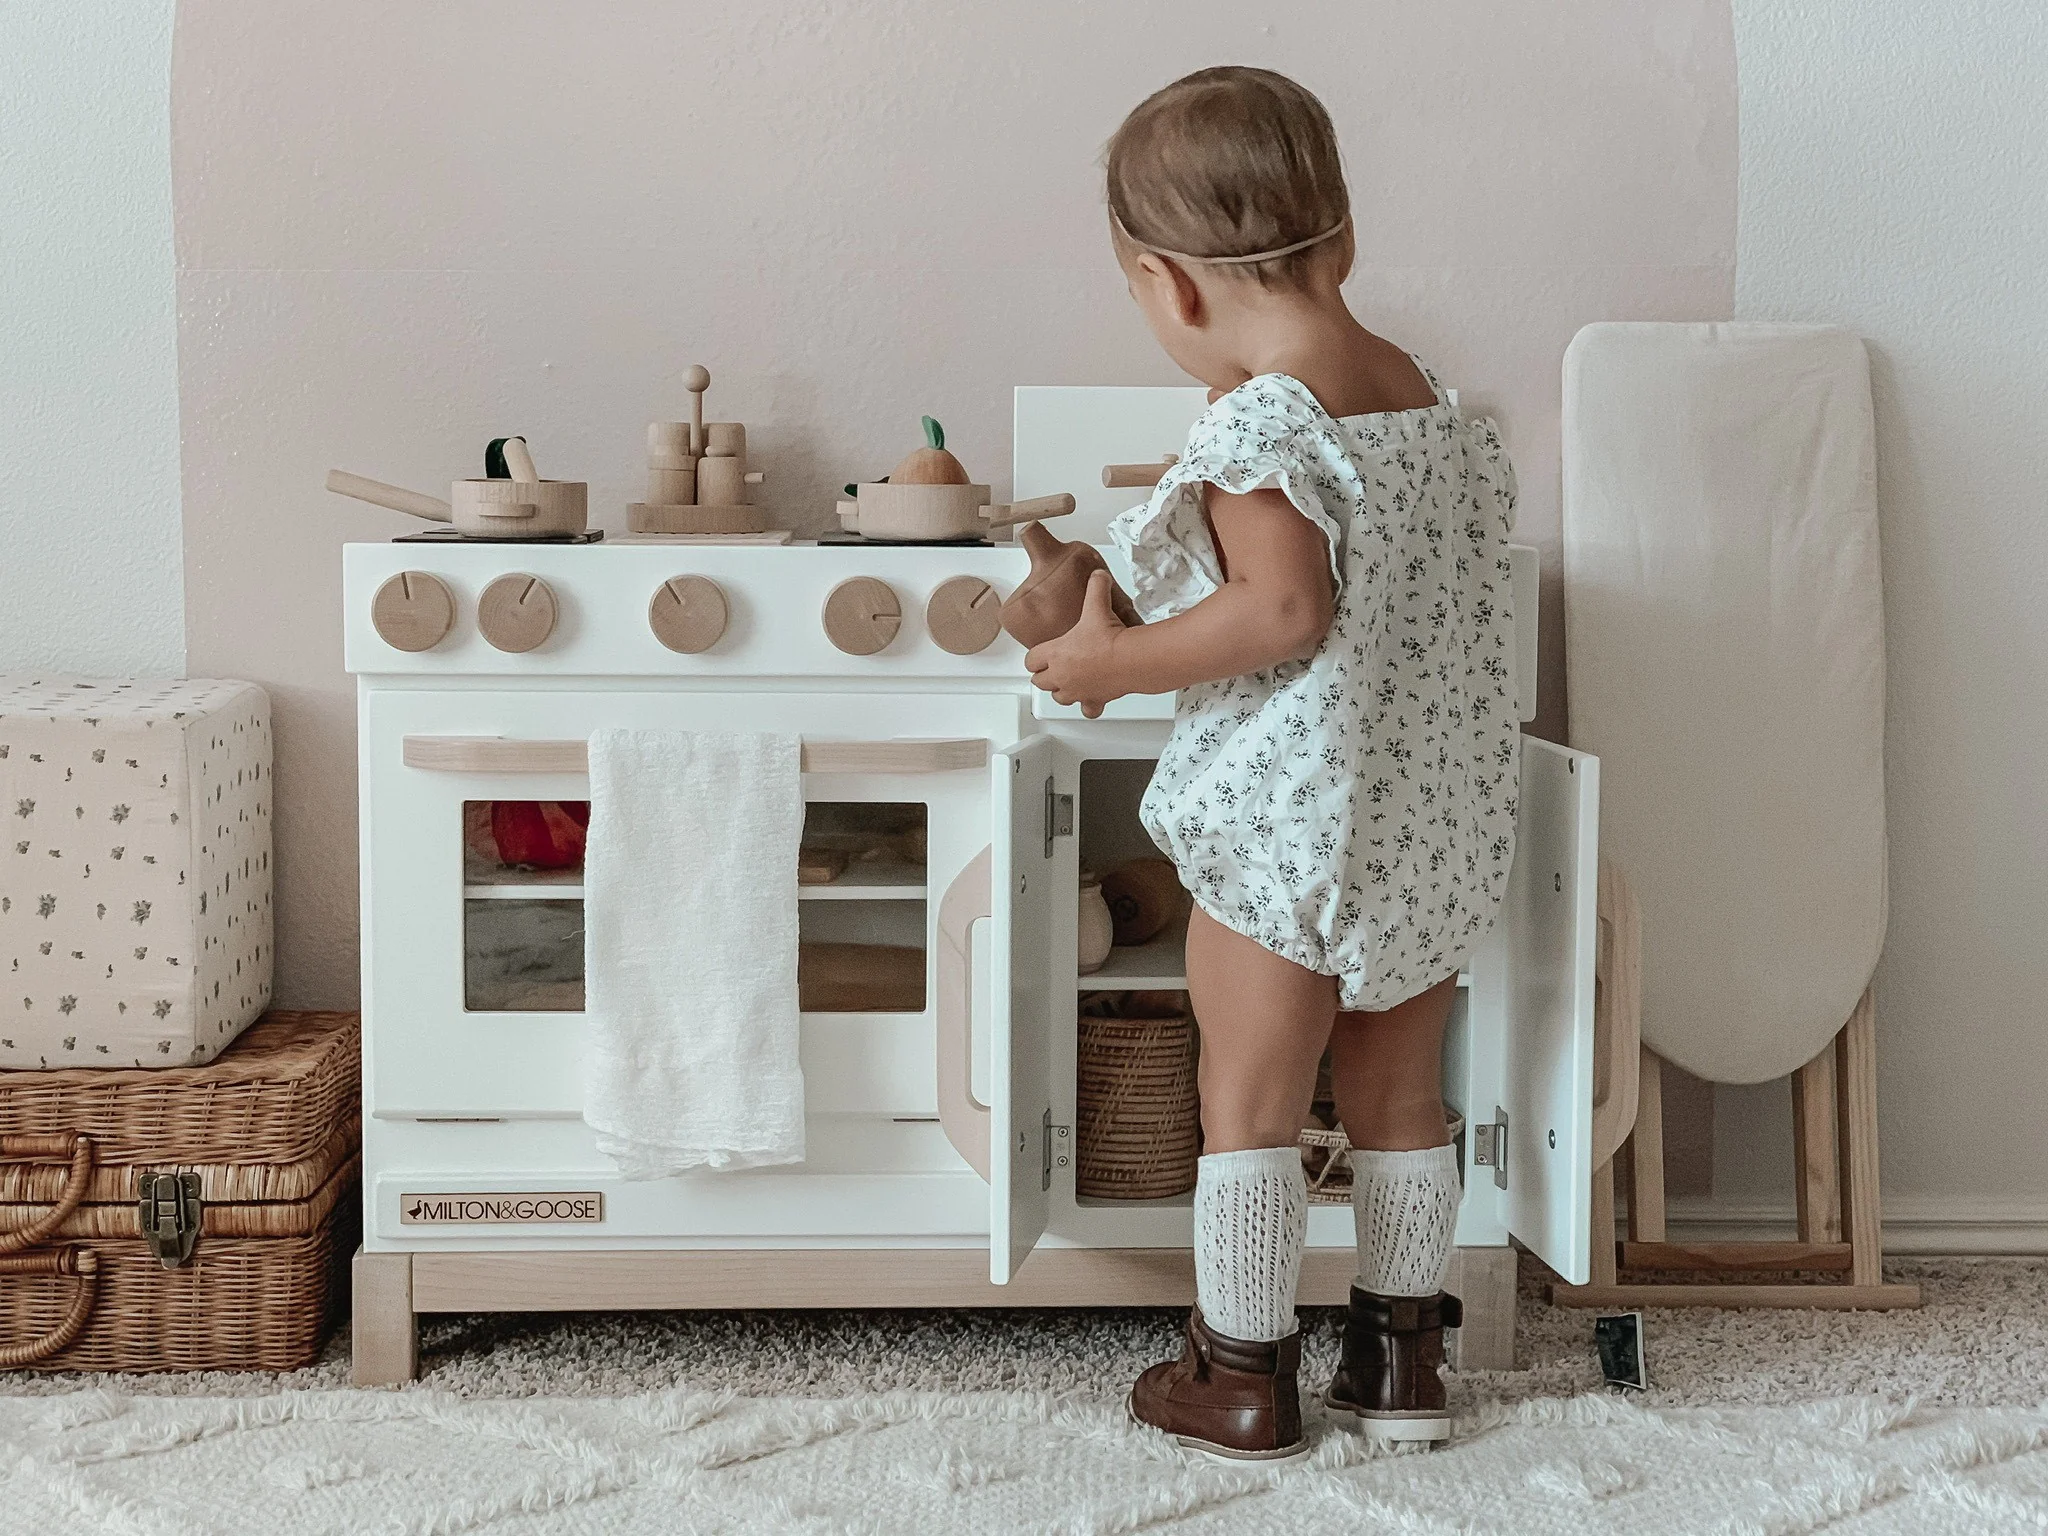 Considerations when Choosing a Play Kitchen